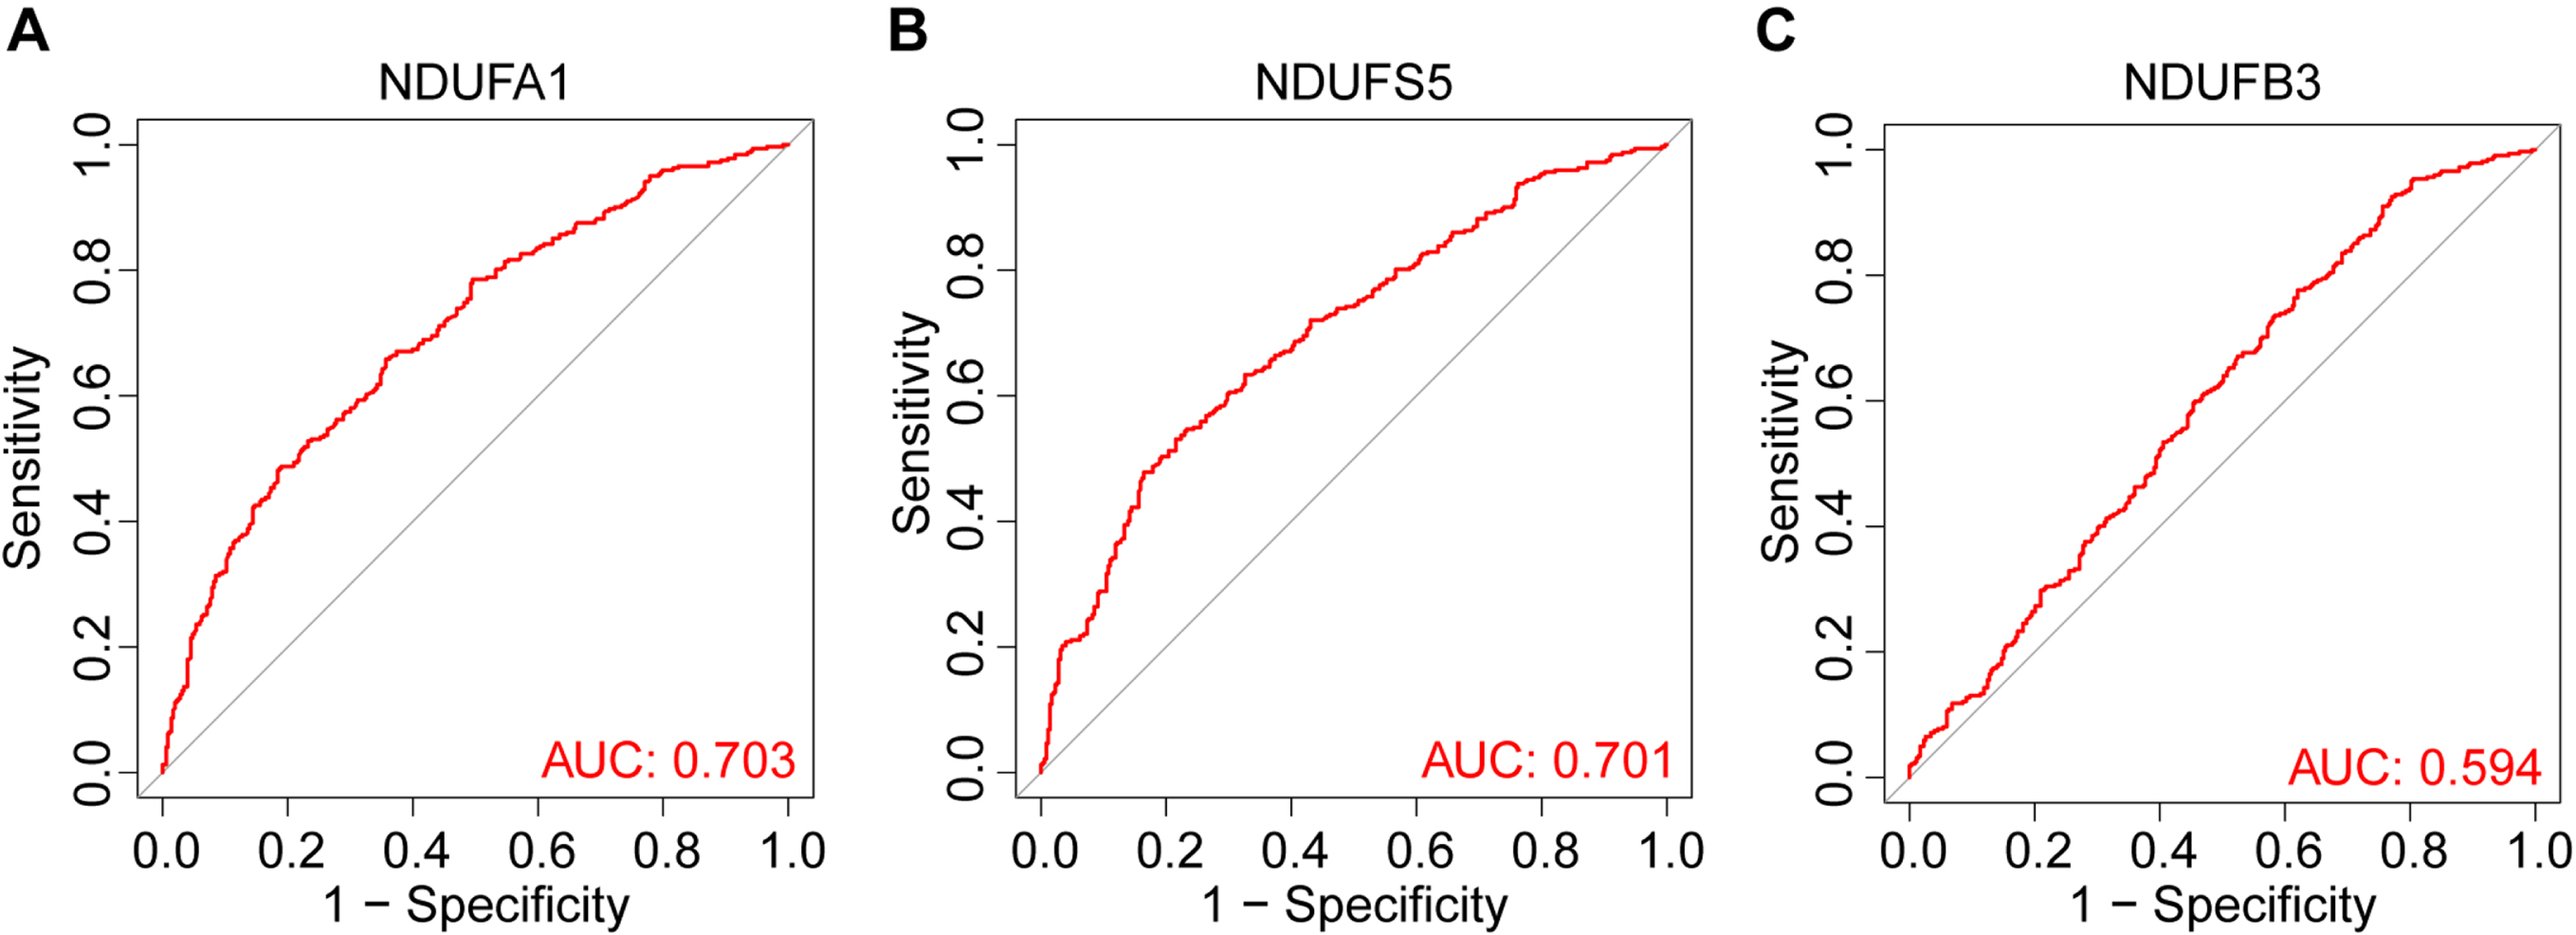 ROC curves and corresponding AUC values for the training groups. The ROC curves of NDUFA1 (A), NDUFS5 (B), and NDUFB3 (C), AUC was 0.703, 0.701, and 0.594 respectively.